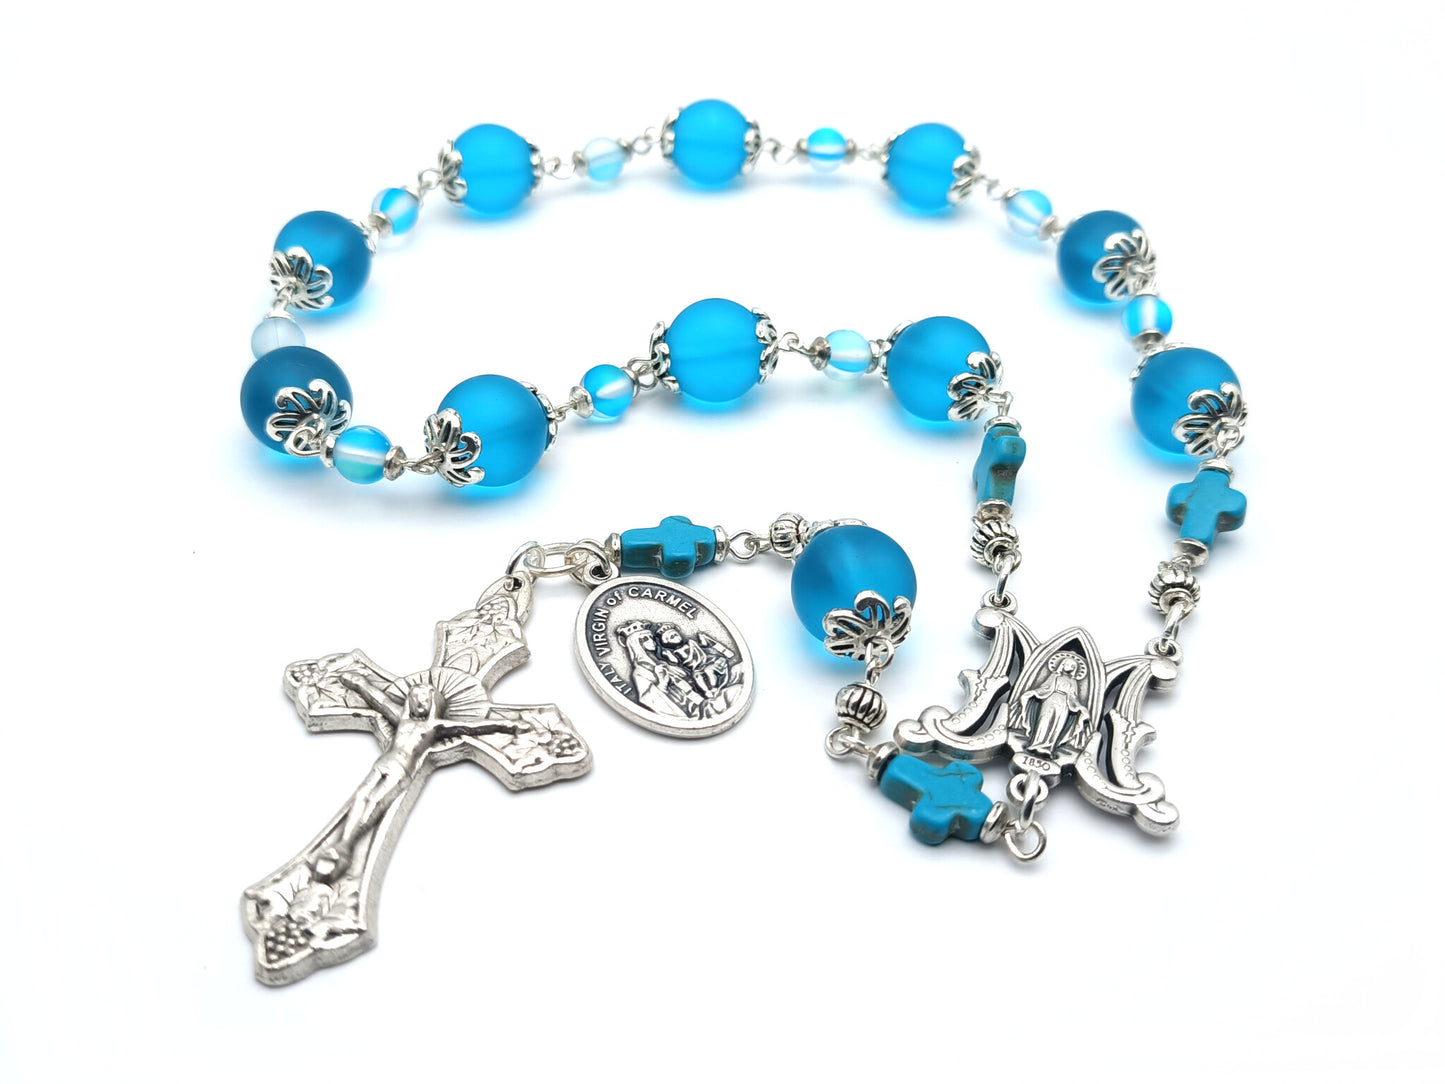 Our Lady of Mount Carmel unique rosary beads single decade with blue glass beads, silver miraculous medal centre medal, vine leaves crucifix and Our Lady of Mount Carmel medal.